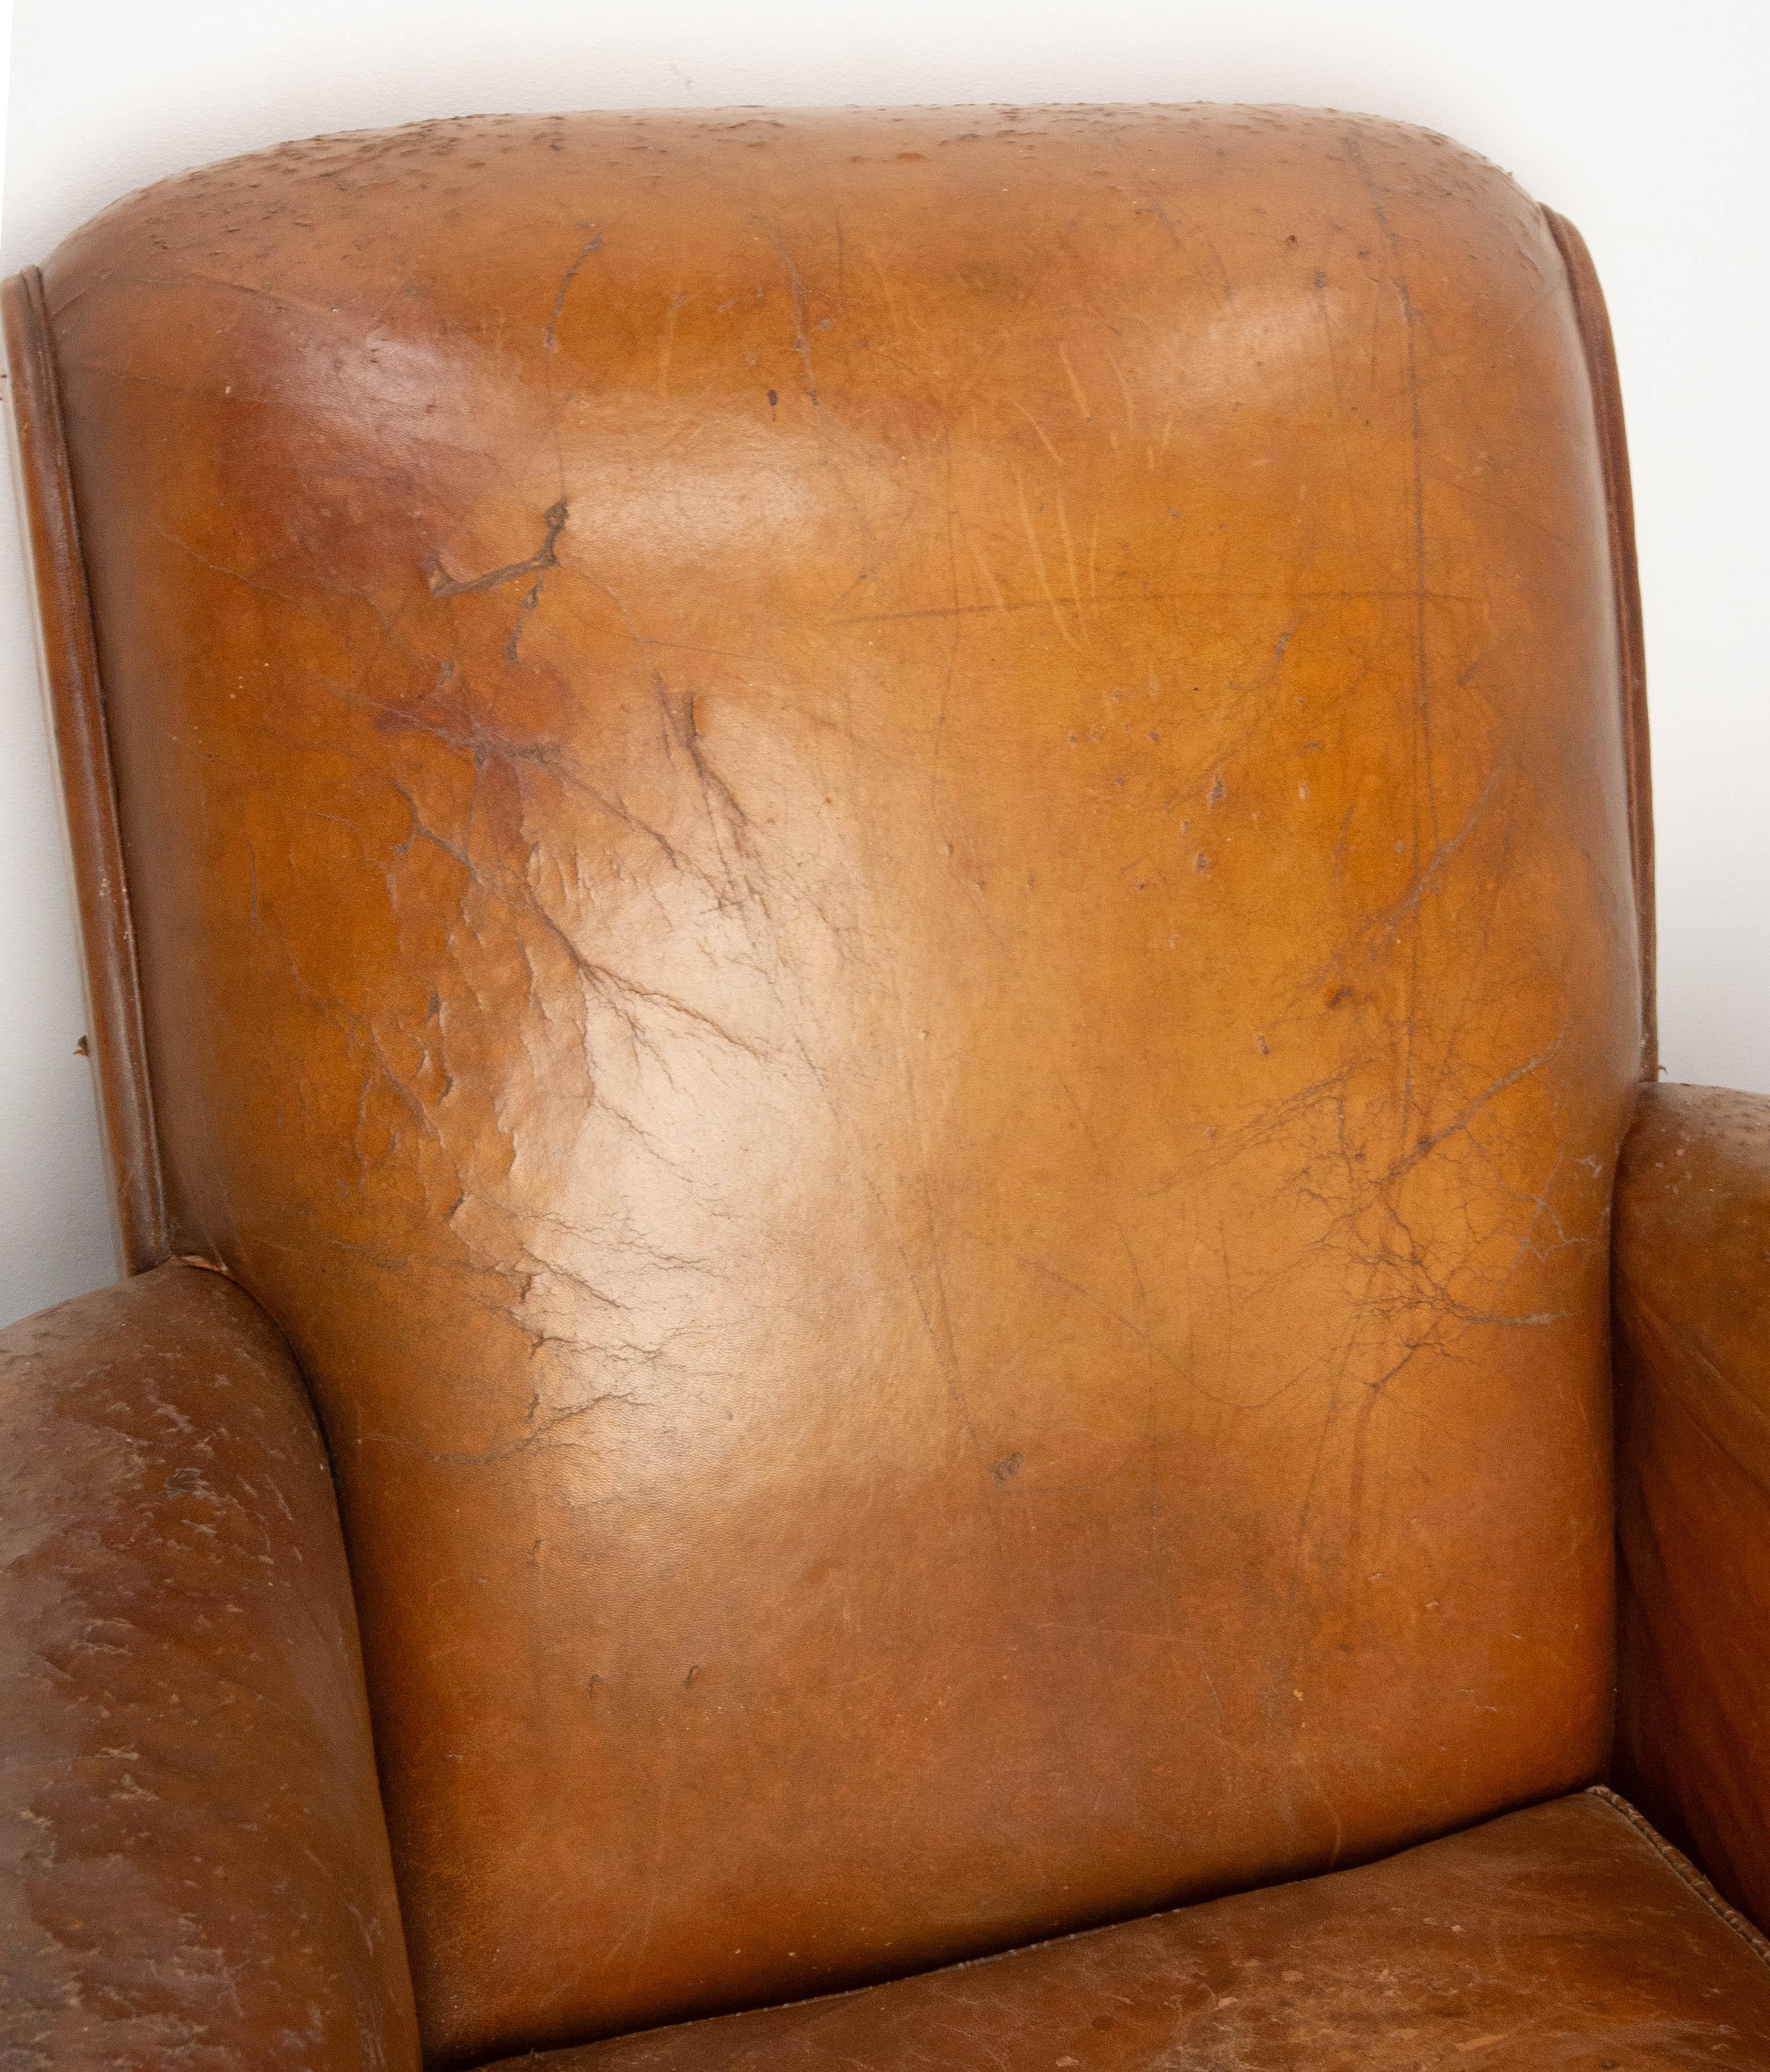 Antique Club Armchair Fauteuil Cognac Leather French or 